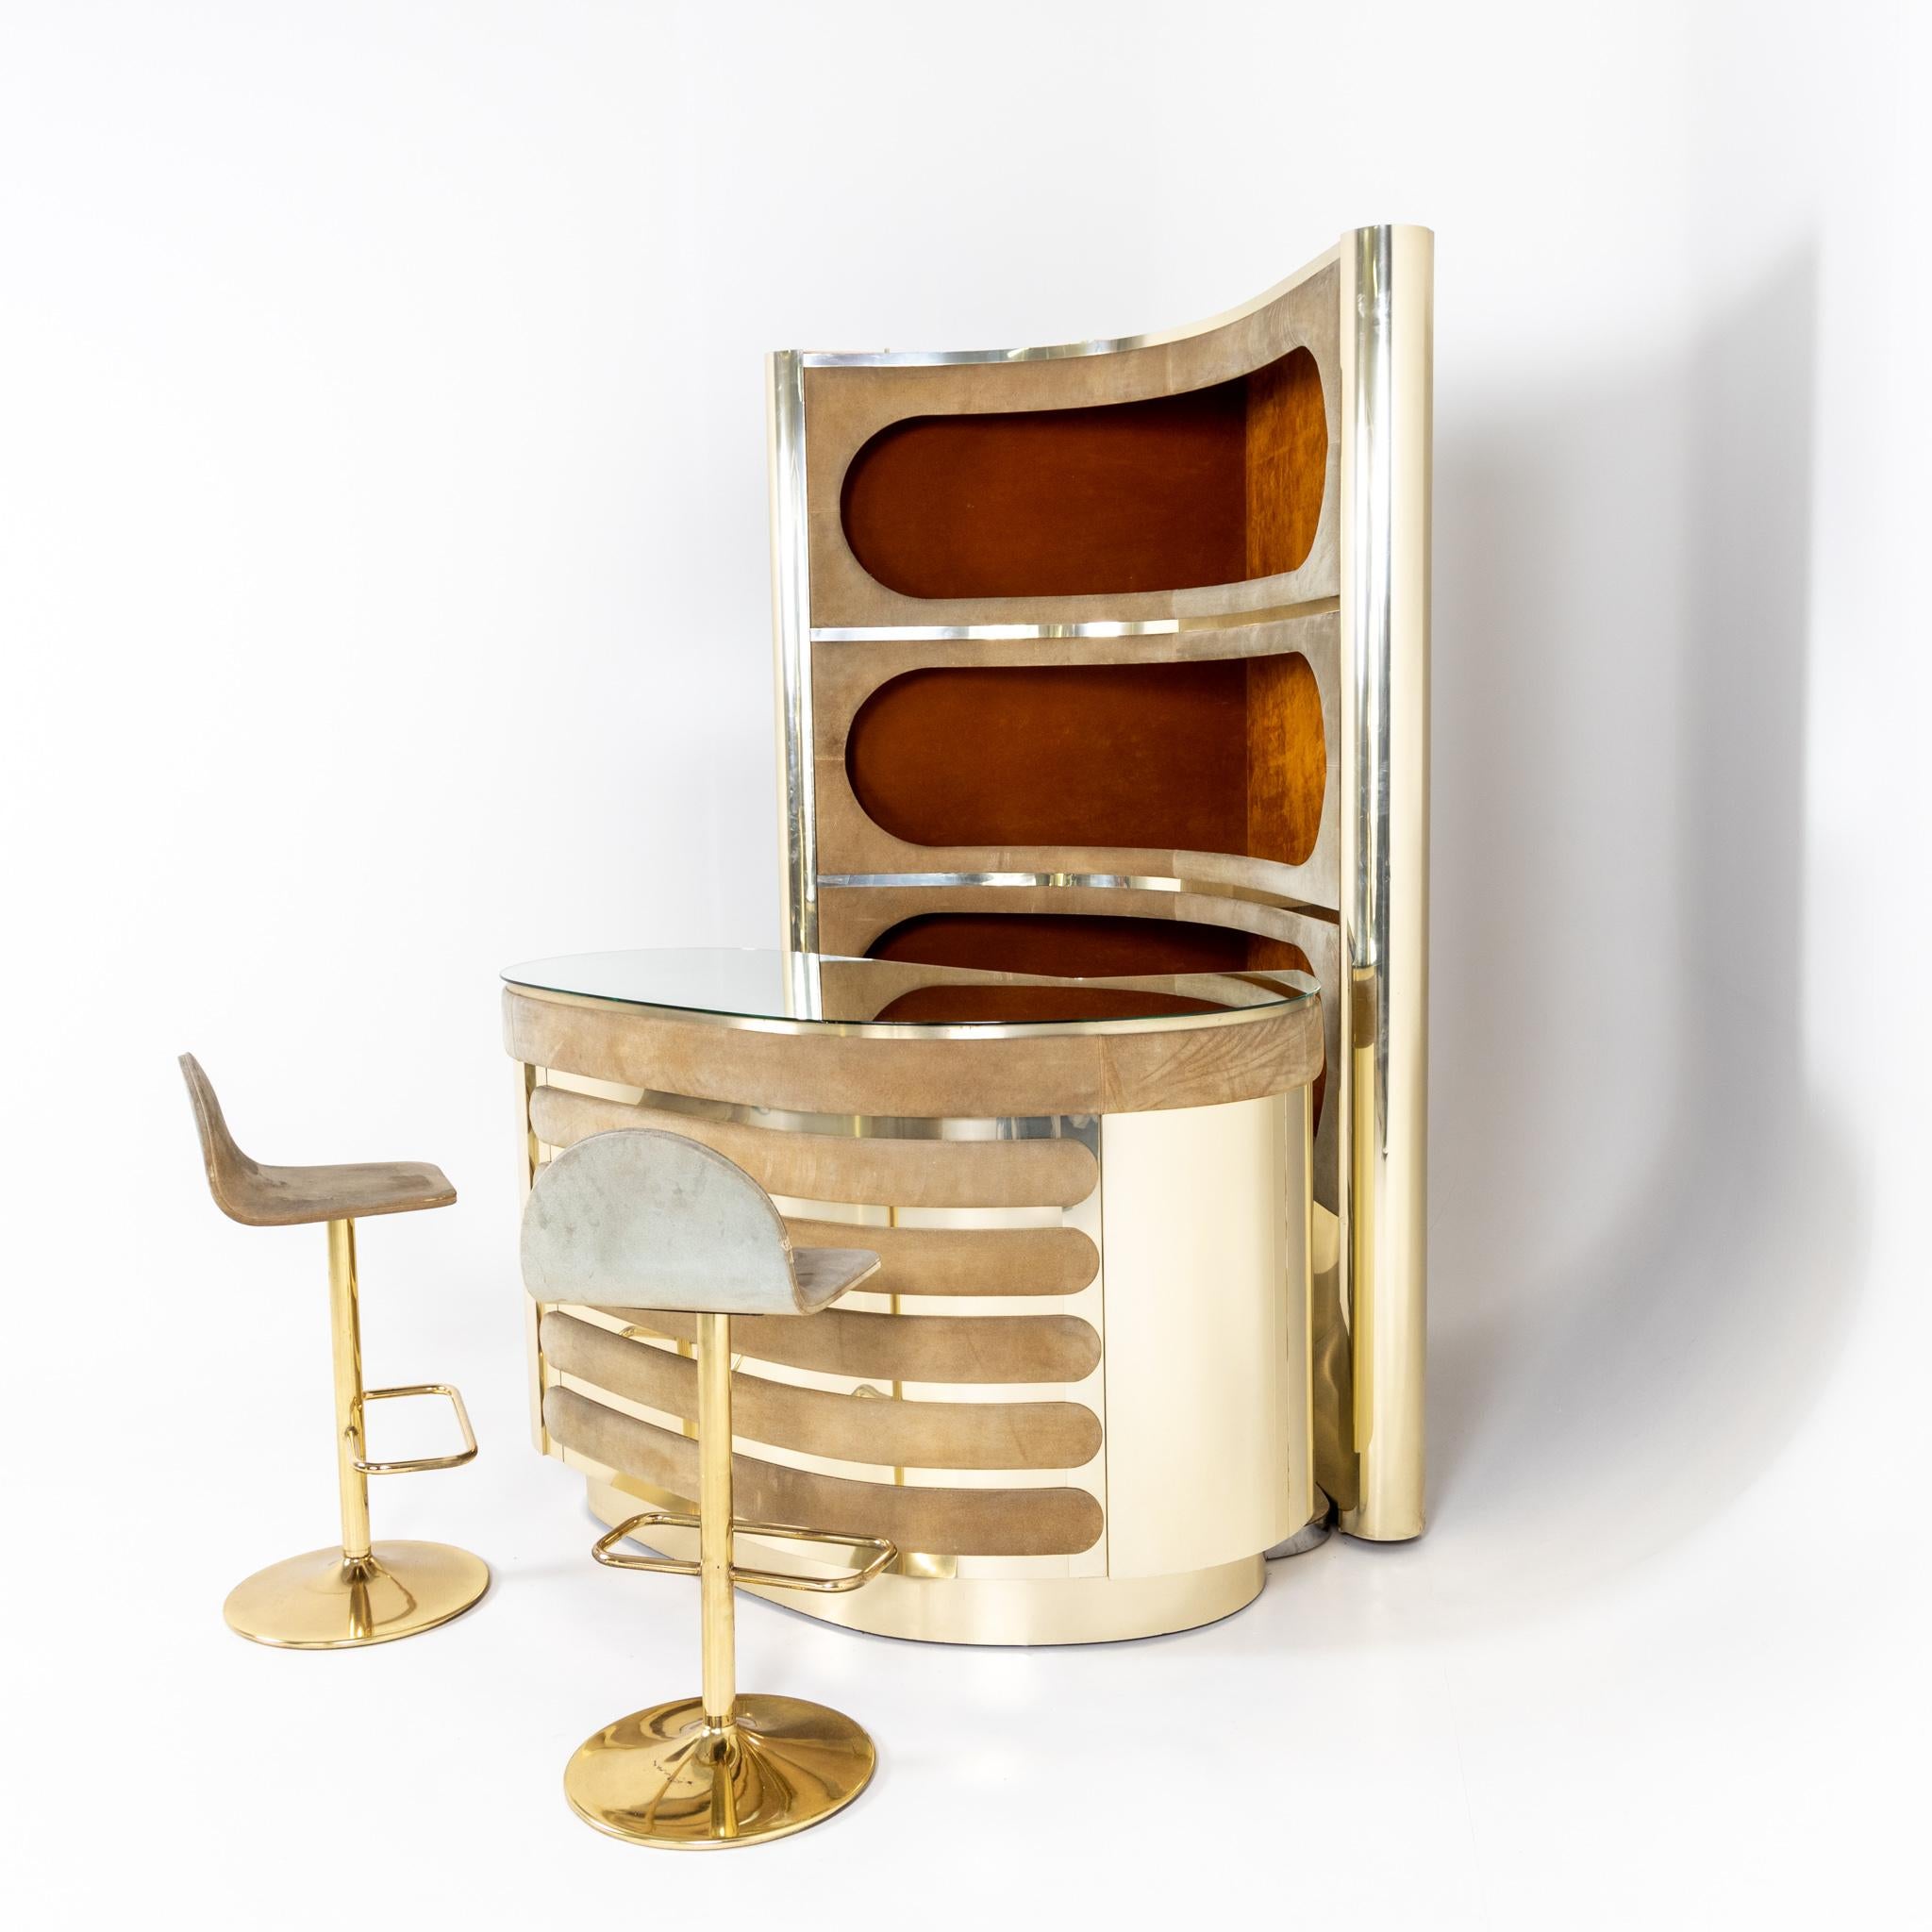 Large kidney-shaped bar with rear shelf and two bar stools. The chromed elements are interrupted by longitudinal oval panels covered with velvet.
Dimensions:
Counter: 88 x 128 x 82 cm
Shelf: 193 x 120.5 x 94 cm
Bar stool 83 x 38 x 37 x 63 cm.